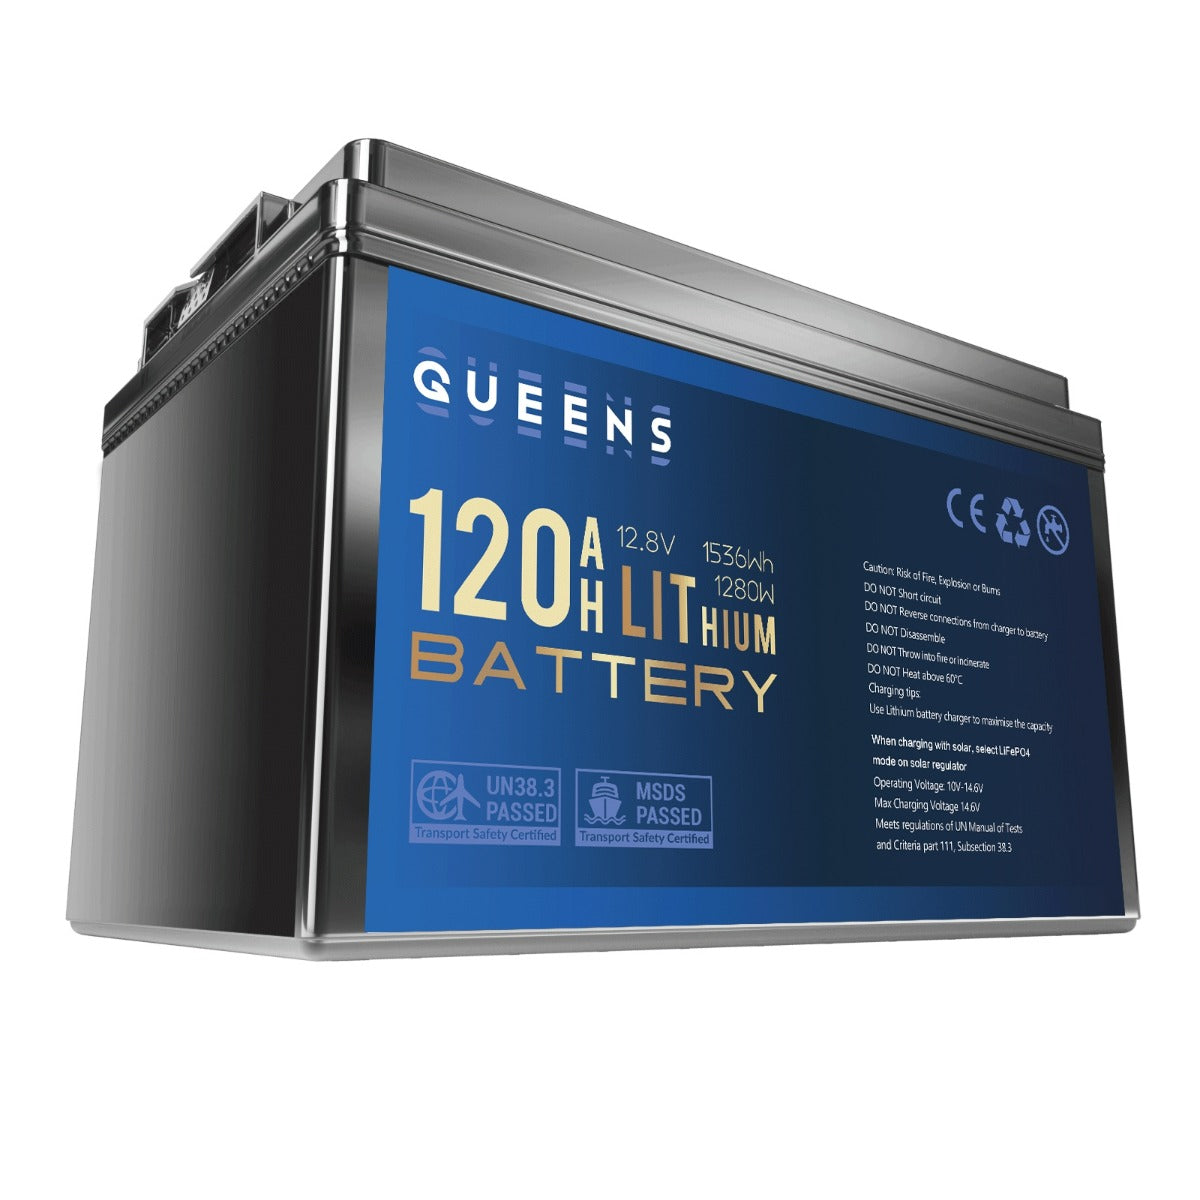 NEW Queens 120Ah 12V Lithium Battery